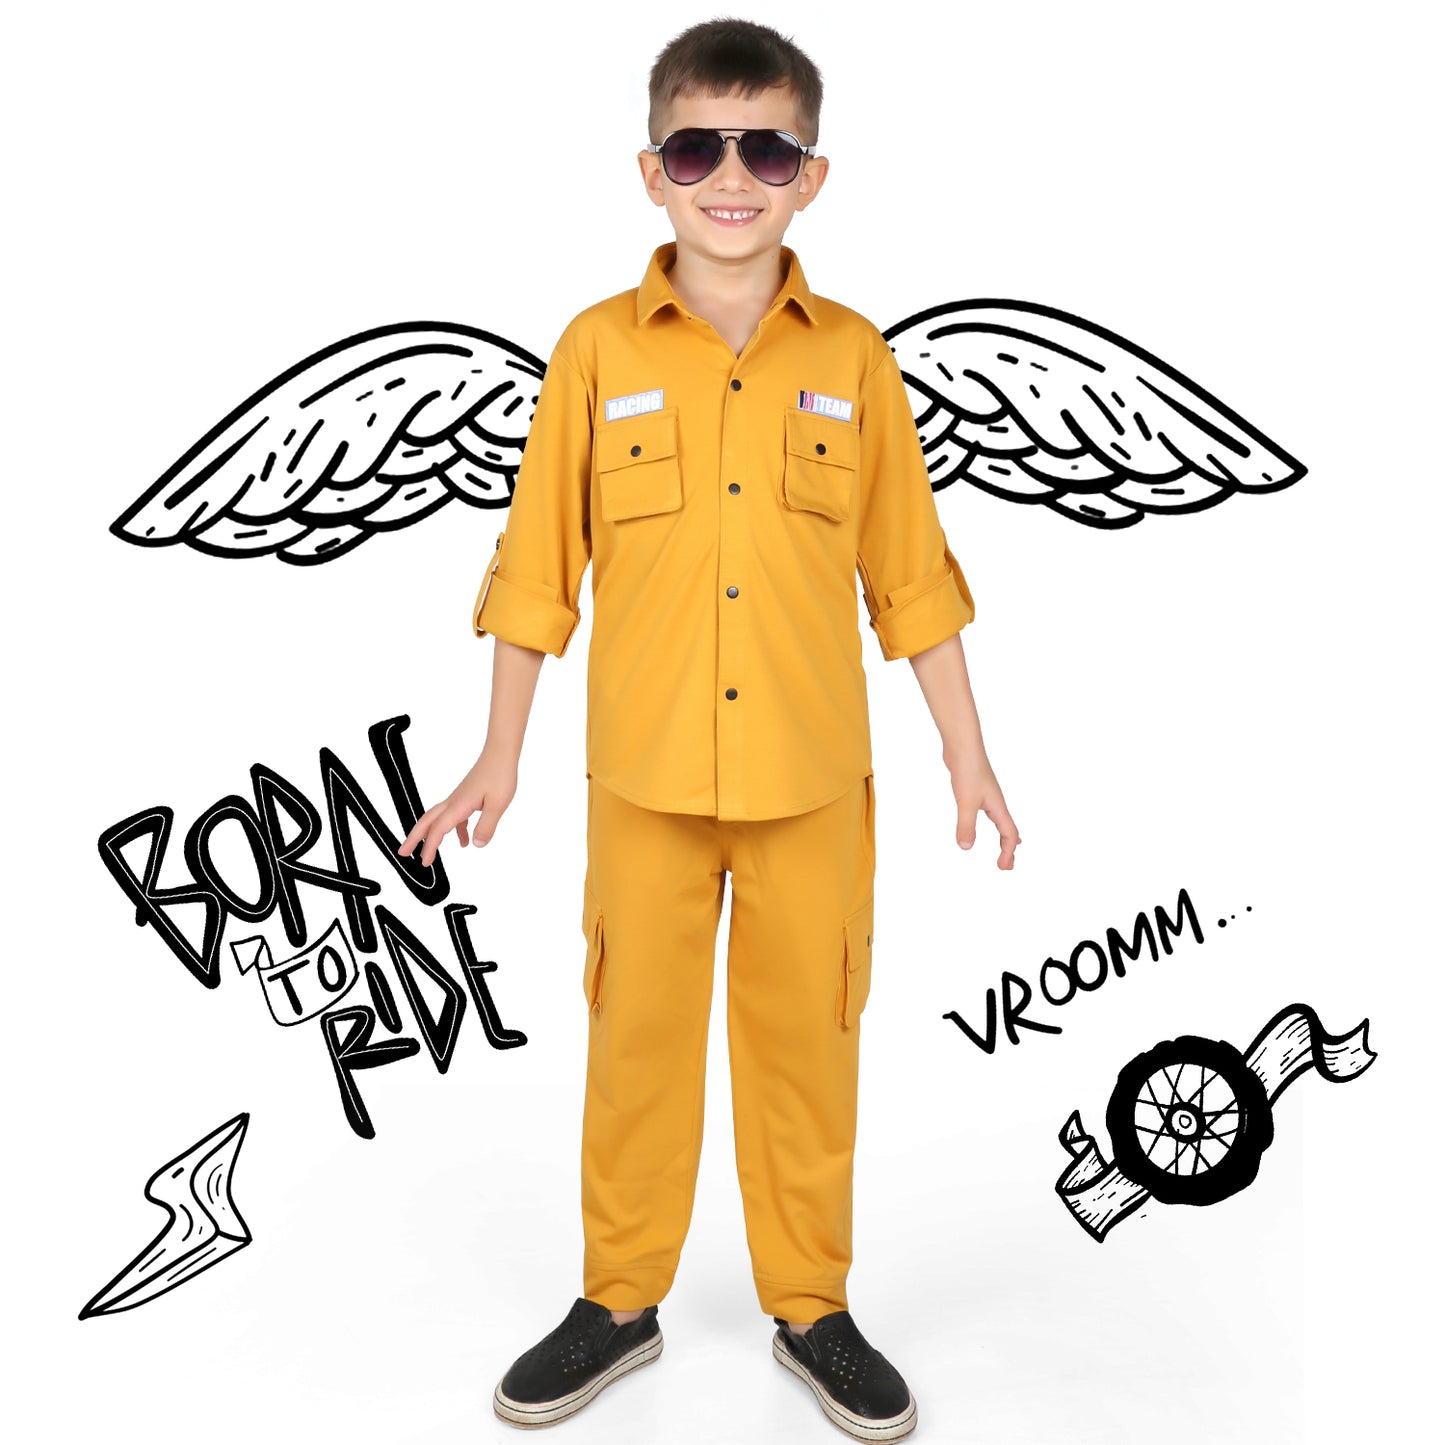 "Start Your Engines: Race to Fun with Racing Co-ord Set!"